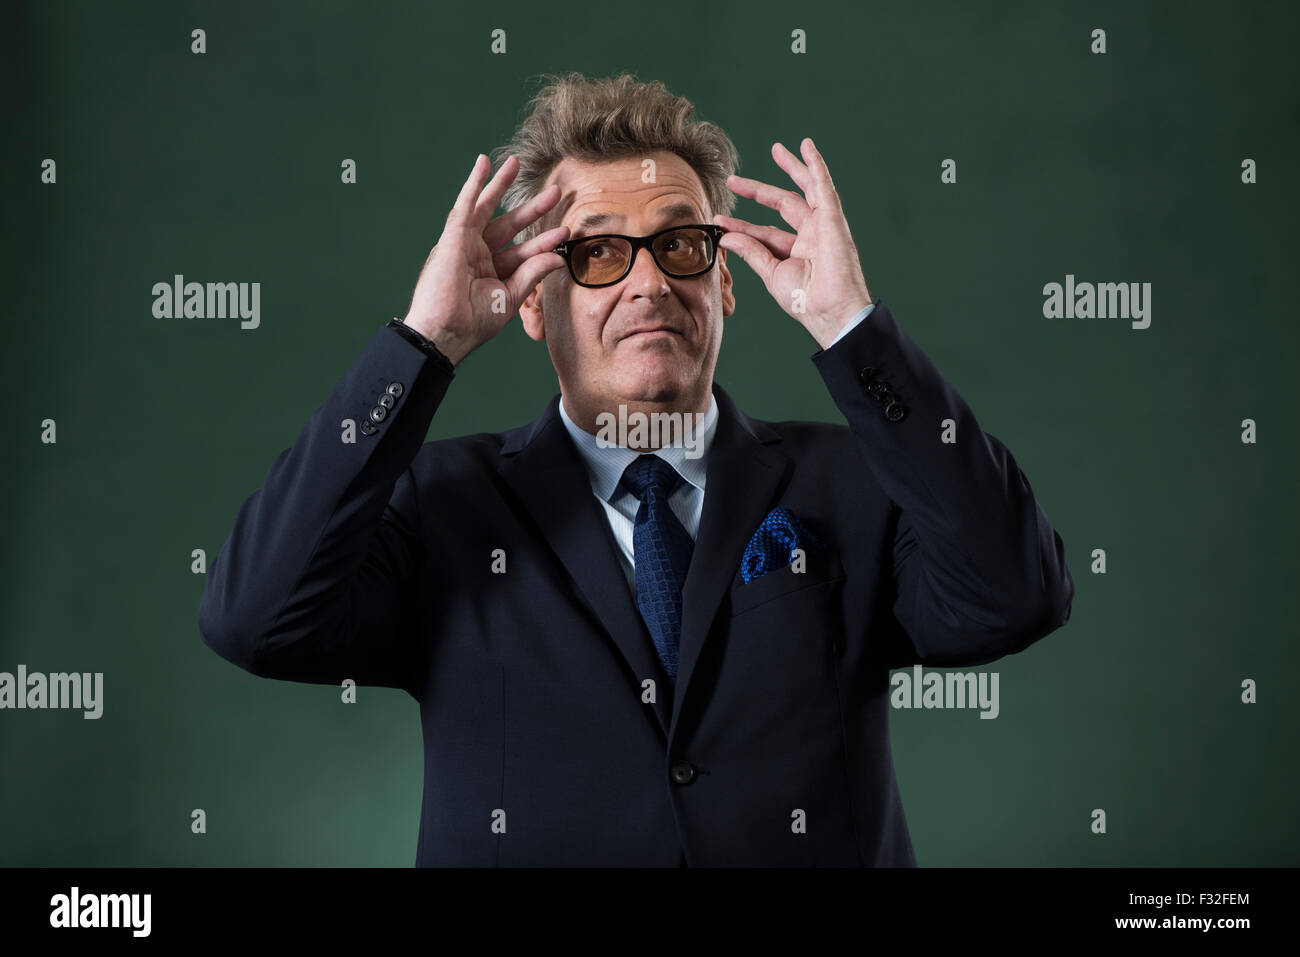 American actor, stand-up comedian and television host Greg Proops. Stock Photo